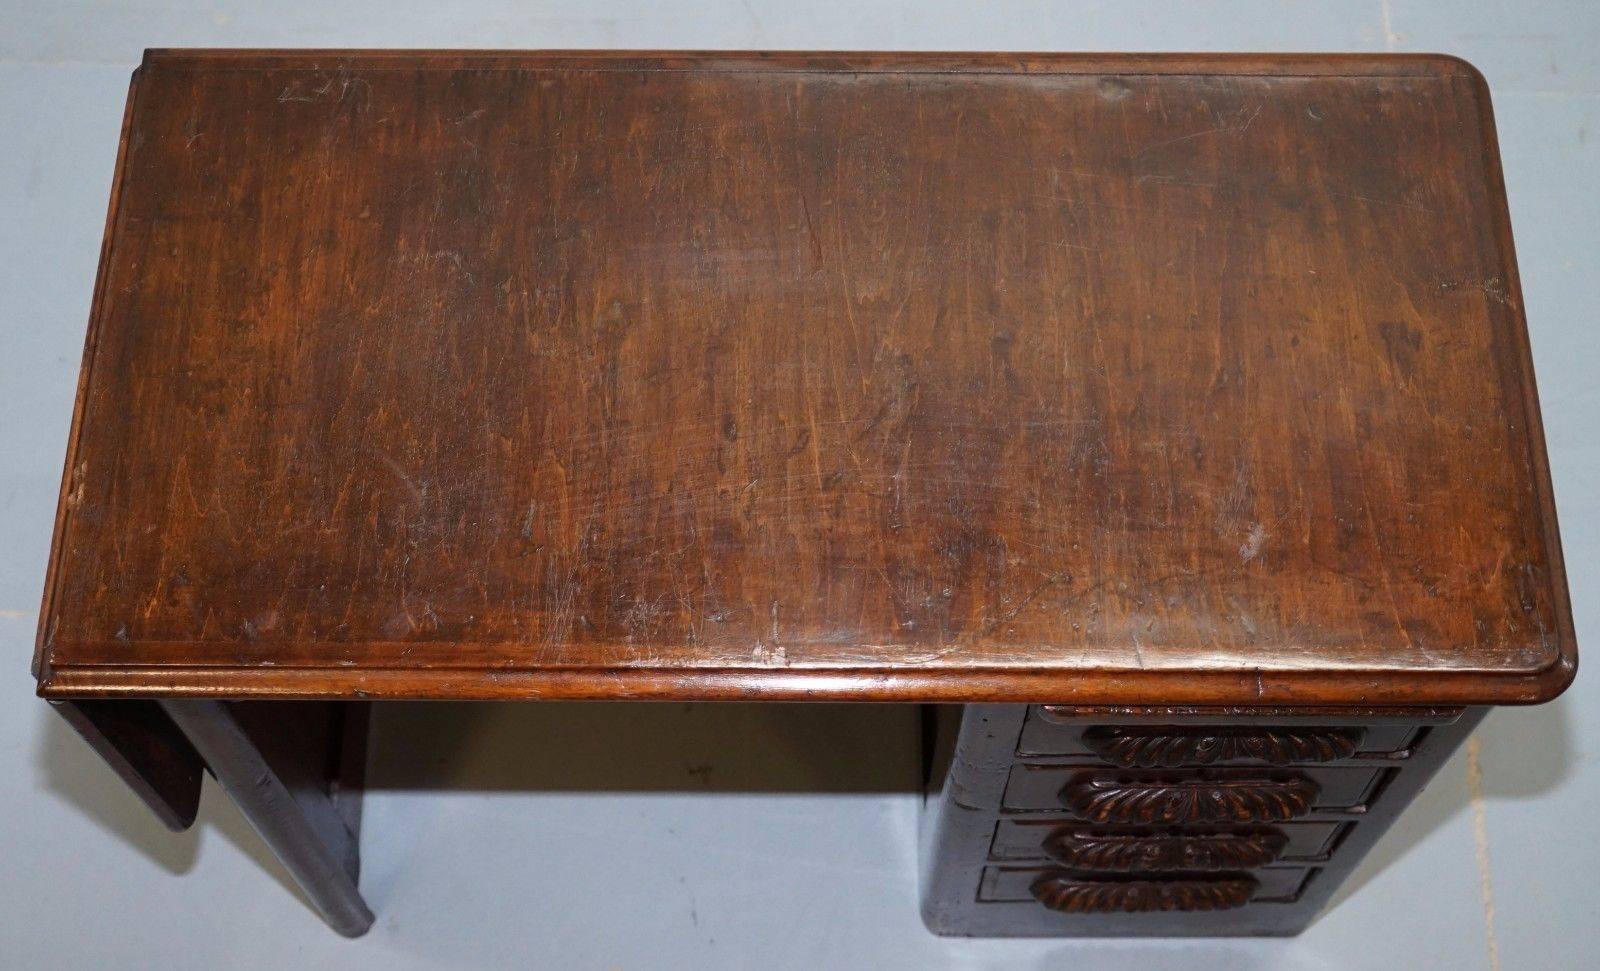 Hand-Carved Rare Edwardian Solid Oak Children's Desk with Extending Flap and PC Mouse Board